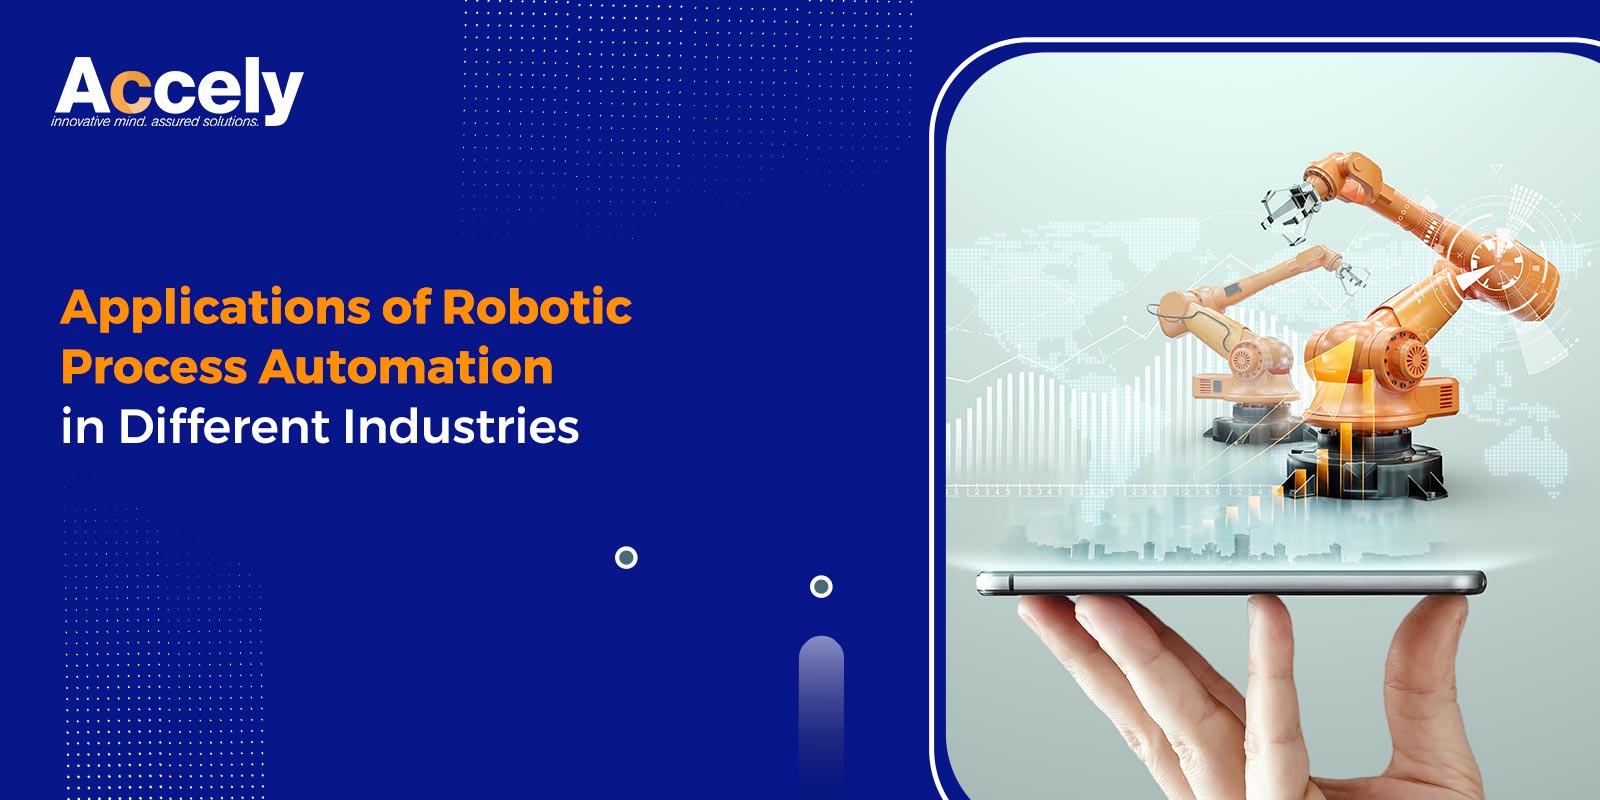 Applications of Robotic Process Automation in Different Industries